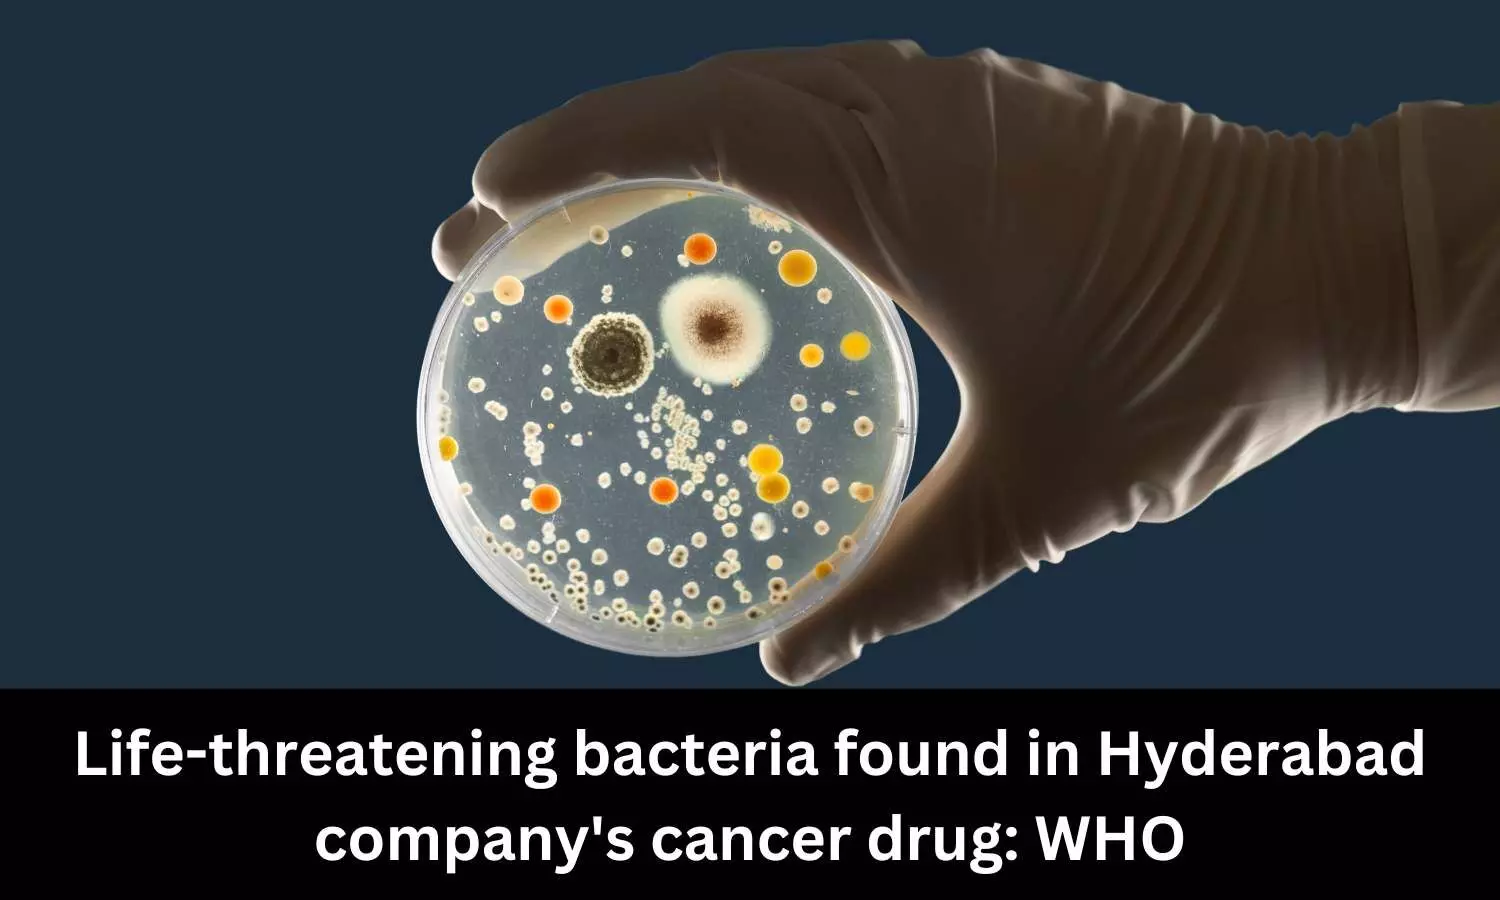 Life-threatening bacteria found in Hyderabad companys cancer drug: WHO